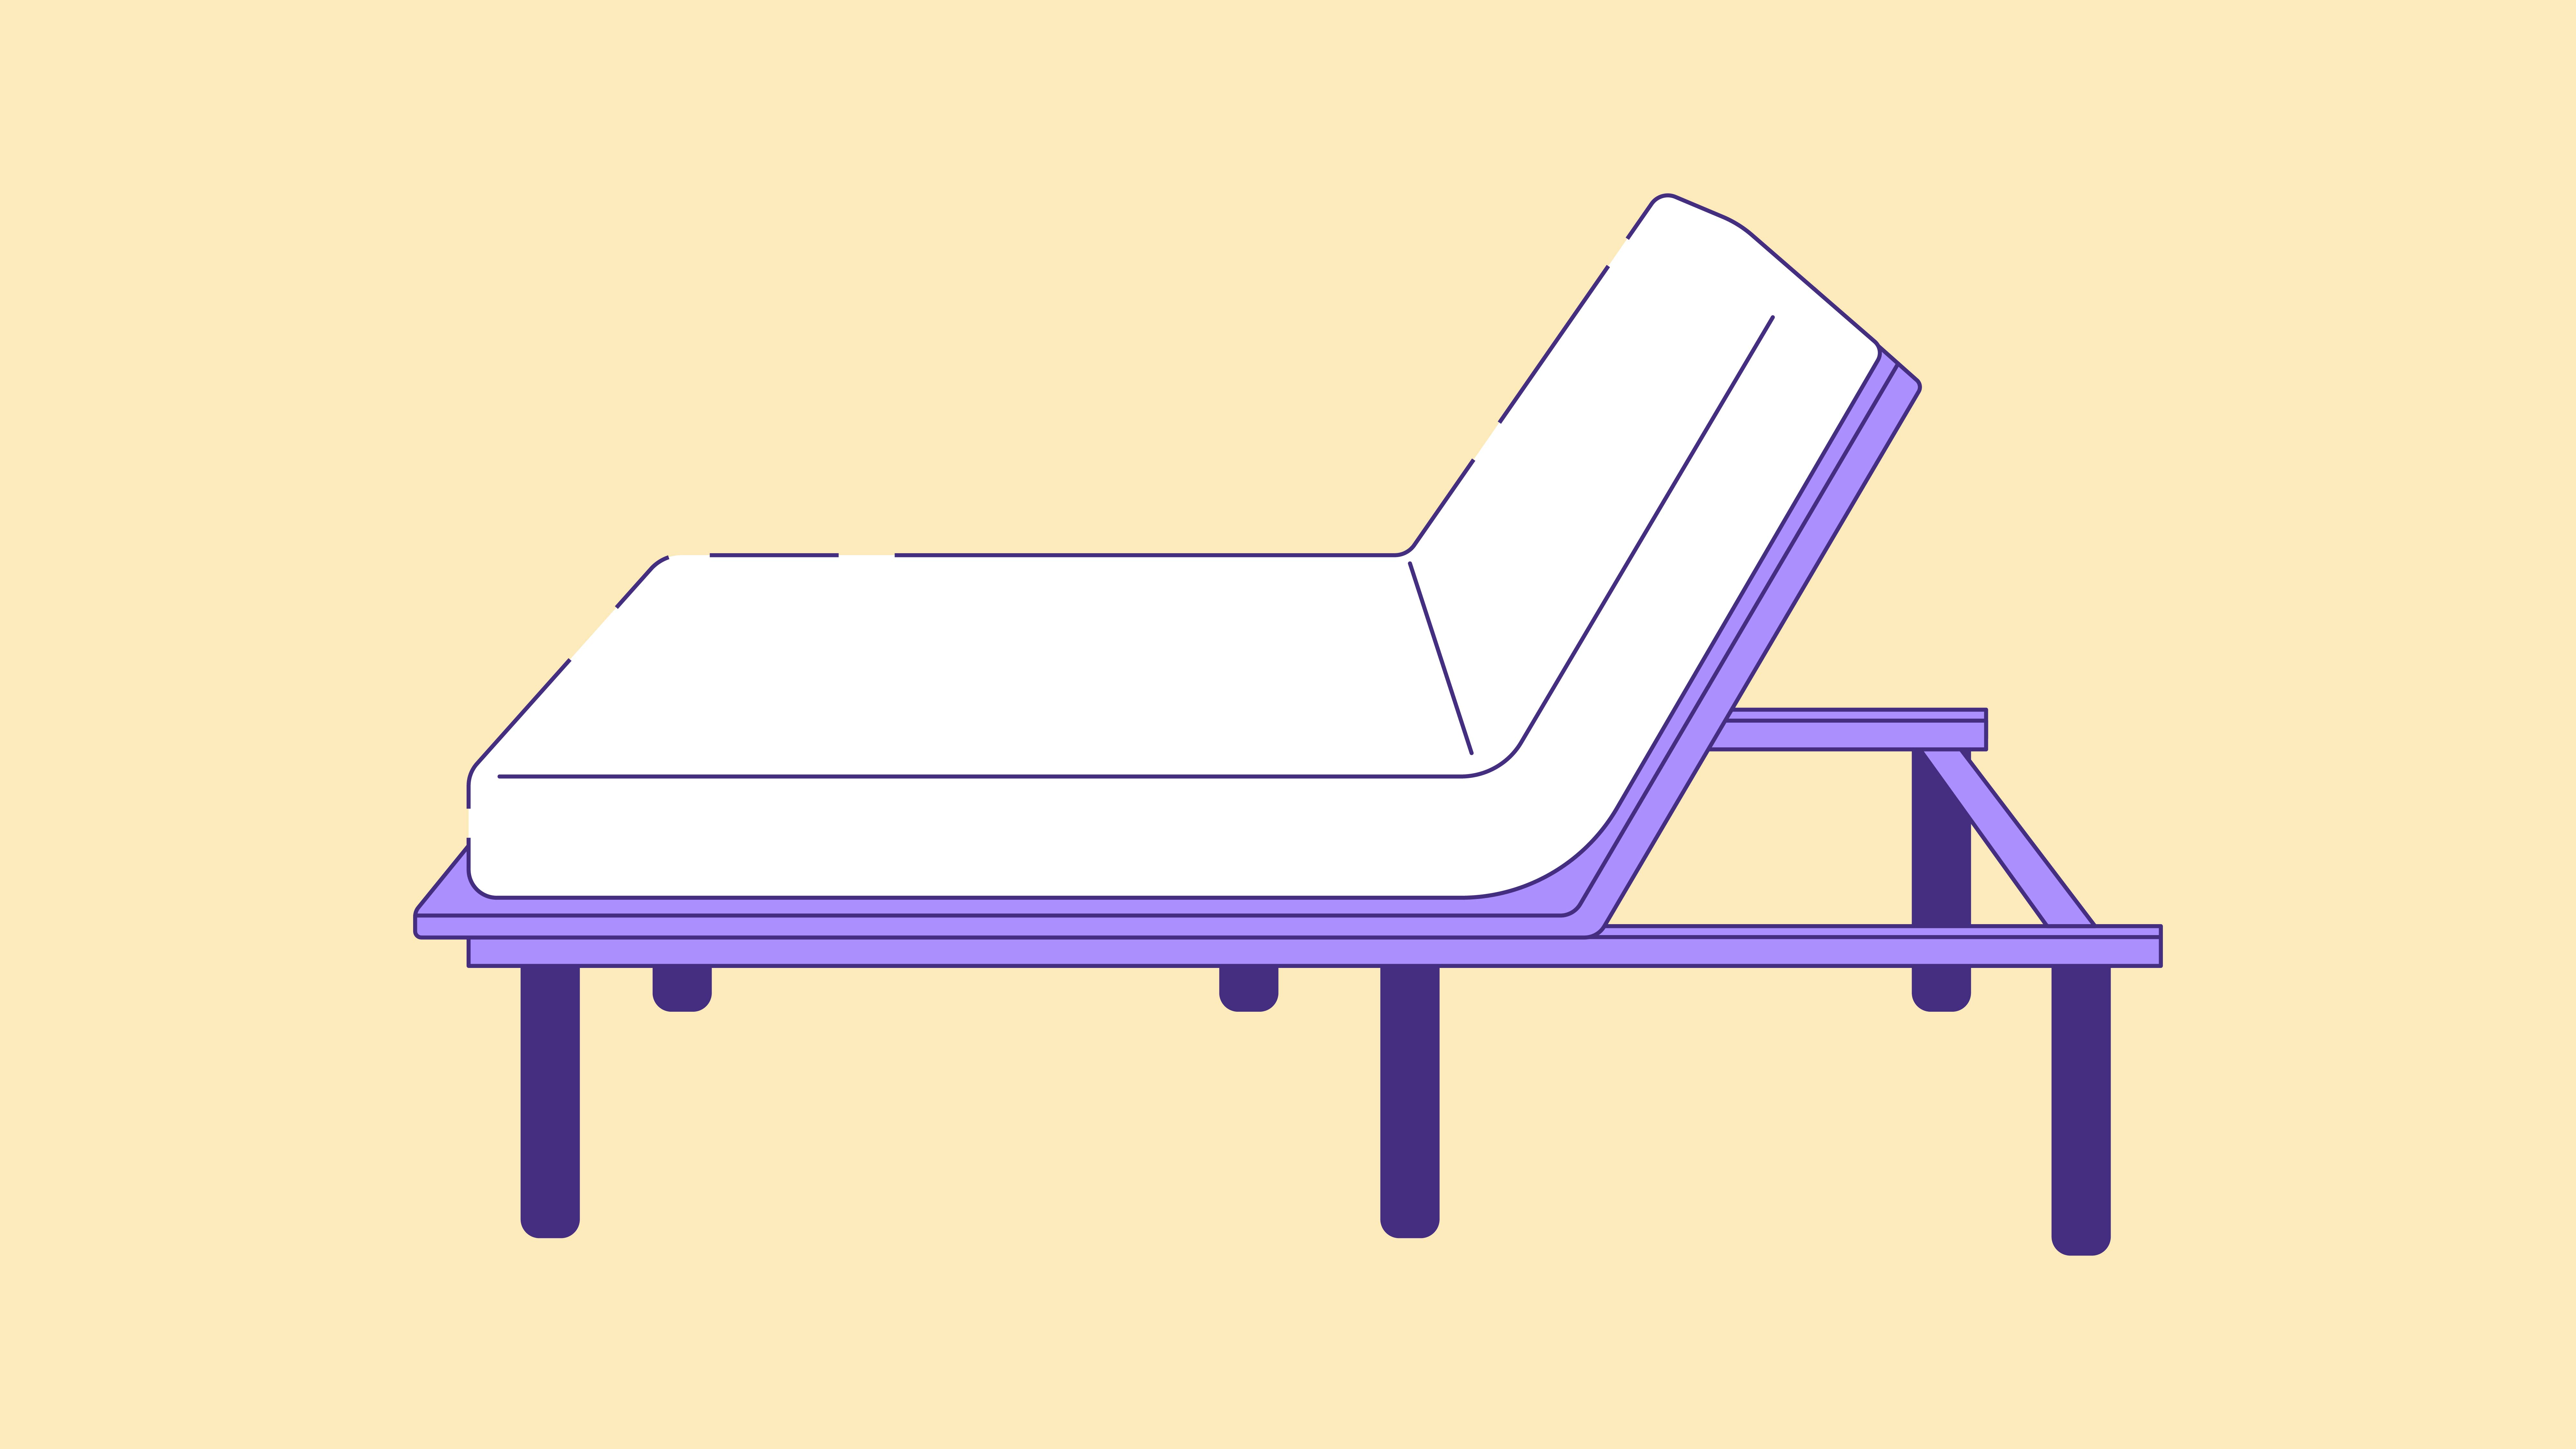 Adjustable Bed Fit Into A Frame, Can A Hybrid Mattress Be Used On An Adjustable Bed Frame